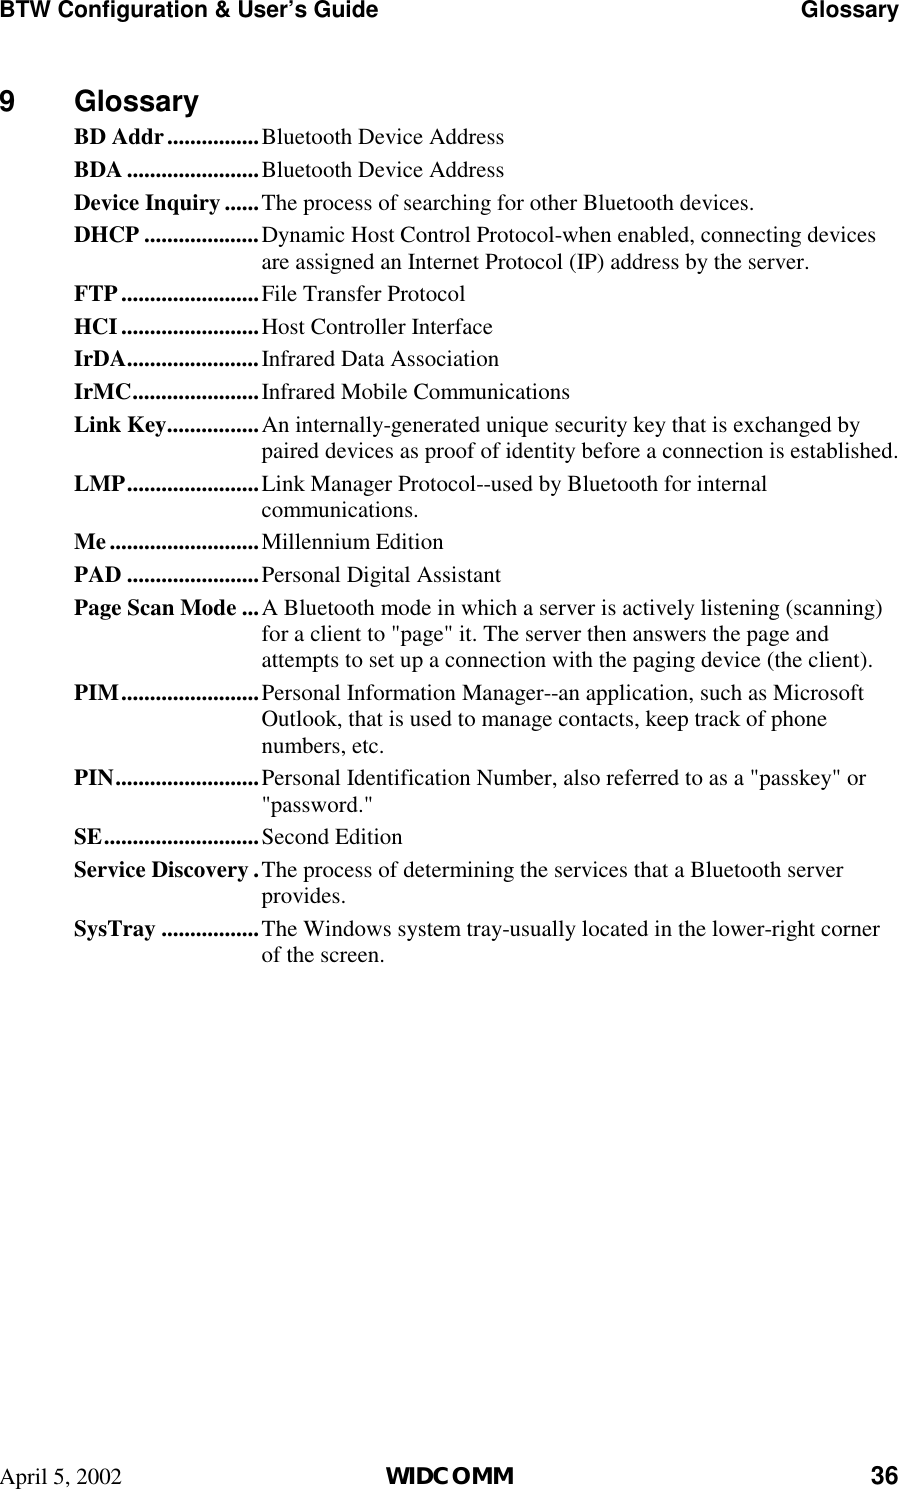 BTW Configuration &amp; User’s Guide    Glossary April 5, 2002  WIDCOMM 36 9 Glossary BD Addr................Bluetooth Device Address BDA .......................Bluetooth Device Address Device Inquiry ......The process of searching for other Bluetooth devices. DHCP ....................Dynamic Host Control Protocol-when enabled, connecting devices are assigned an Internet Protocol (IP) address by the server. FTP........................File Transfer Protocol HCI........................Host Controller Interface IrDA.......................Infrared Data Association IrMC......................Infrared Mobile Communications Link Key................An internally-generated unique security key that is exchanged by paired devices as proof of identity before a connection is established. LMP.......................Link Manager Protocol--used by Bluetooth for internal communications. Me..........................Millennium Edition PAD .......................Personal Digital Assistant Page Scan Mode ...A Bluetooth mode in which a server is actively listening (scanning) for a client to &quot;page&quot; it. The server then answers the page and attempts to set up a connection with the paging device (the client). PIM........................Personal Information Manager--an application, such as Microsoft Outlook, that is used to manage contacts, keep track of phone numbers, etc. PIN.........................Personal Identification Number, also referred to as a &quot;passkey&quot; or &quot;password.&quot; SE...........................Second Edition Service Discovery .The process of determining the services that a Bluetooth server provides. SysTray .................The Windows system tray-usually located in the lower-right corner of the screen. 